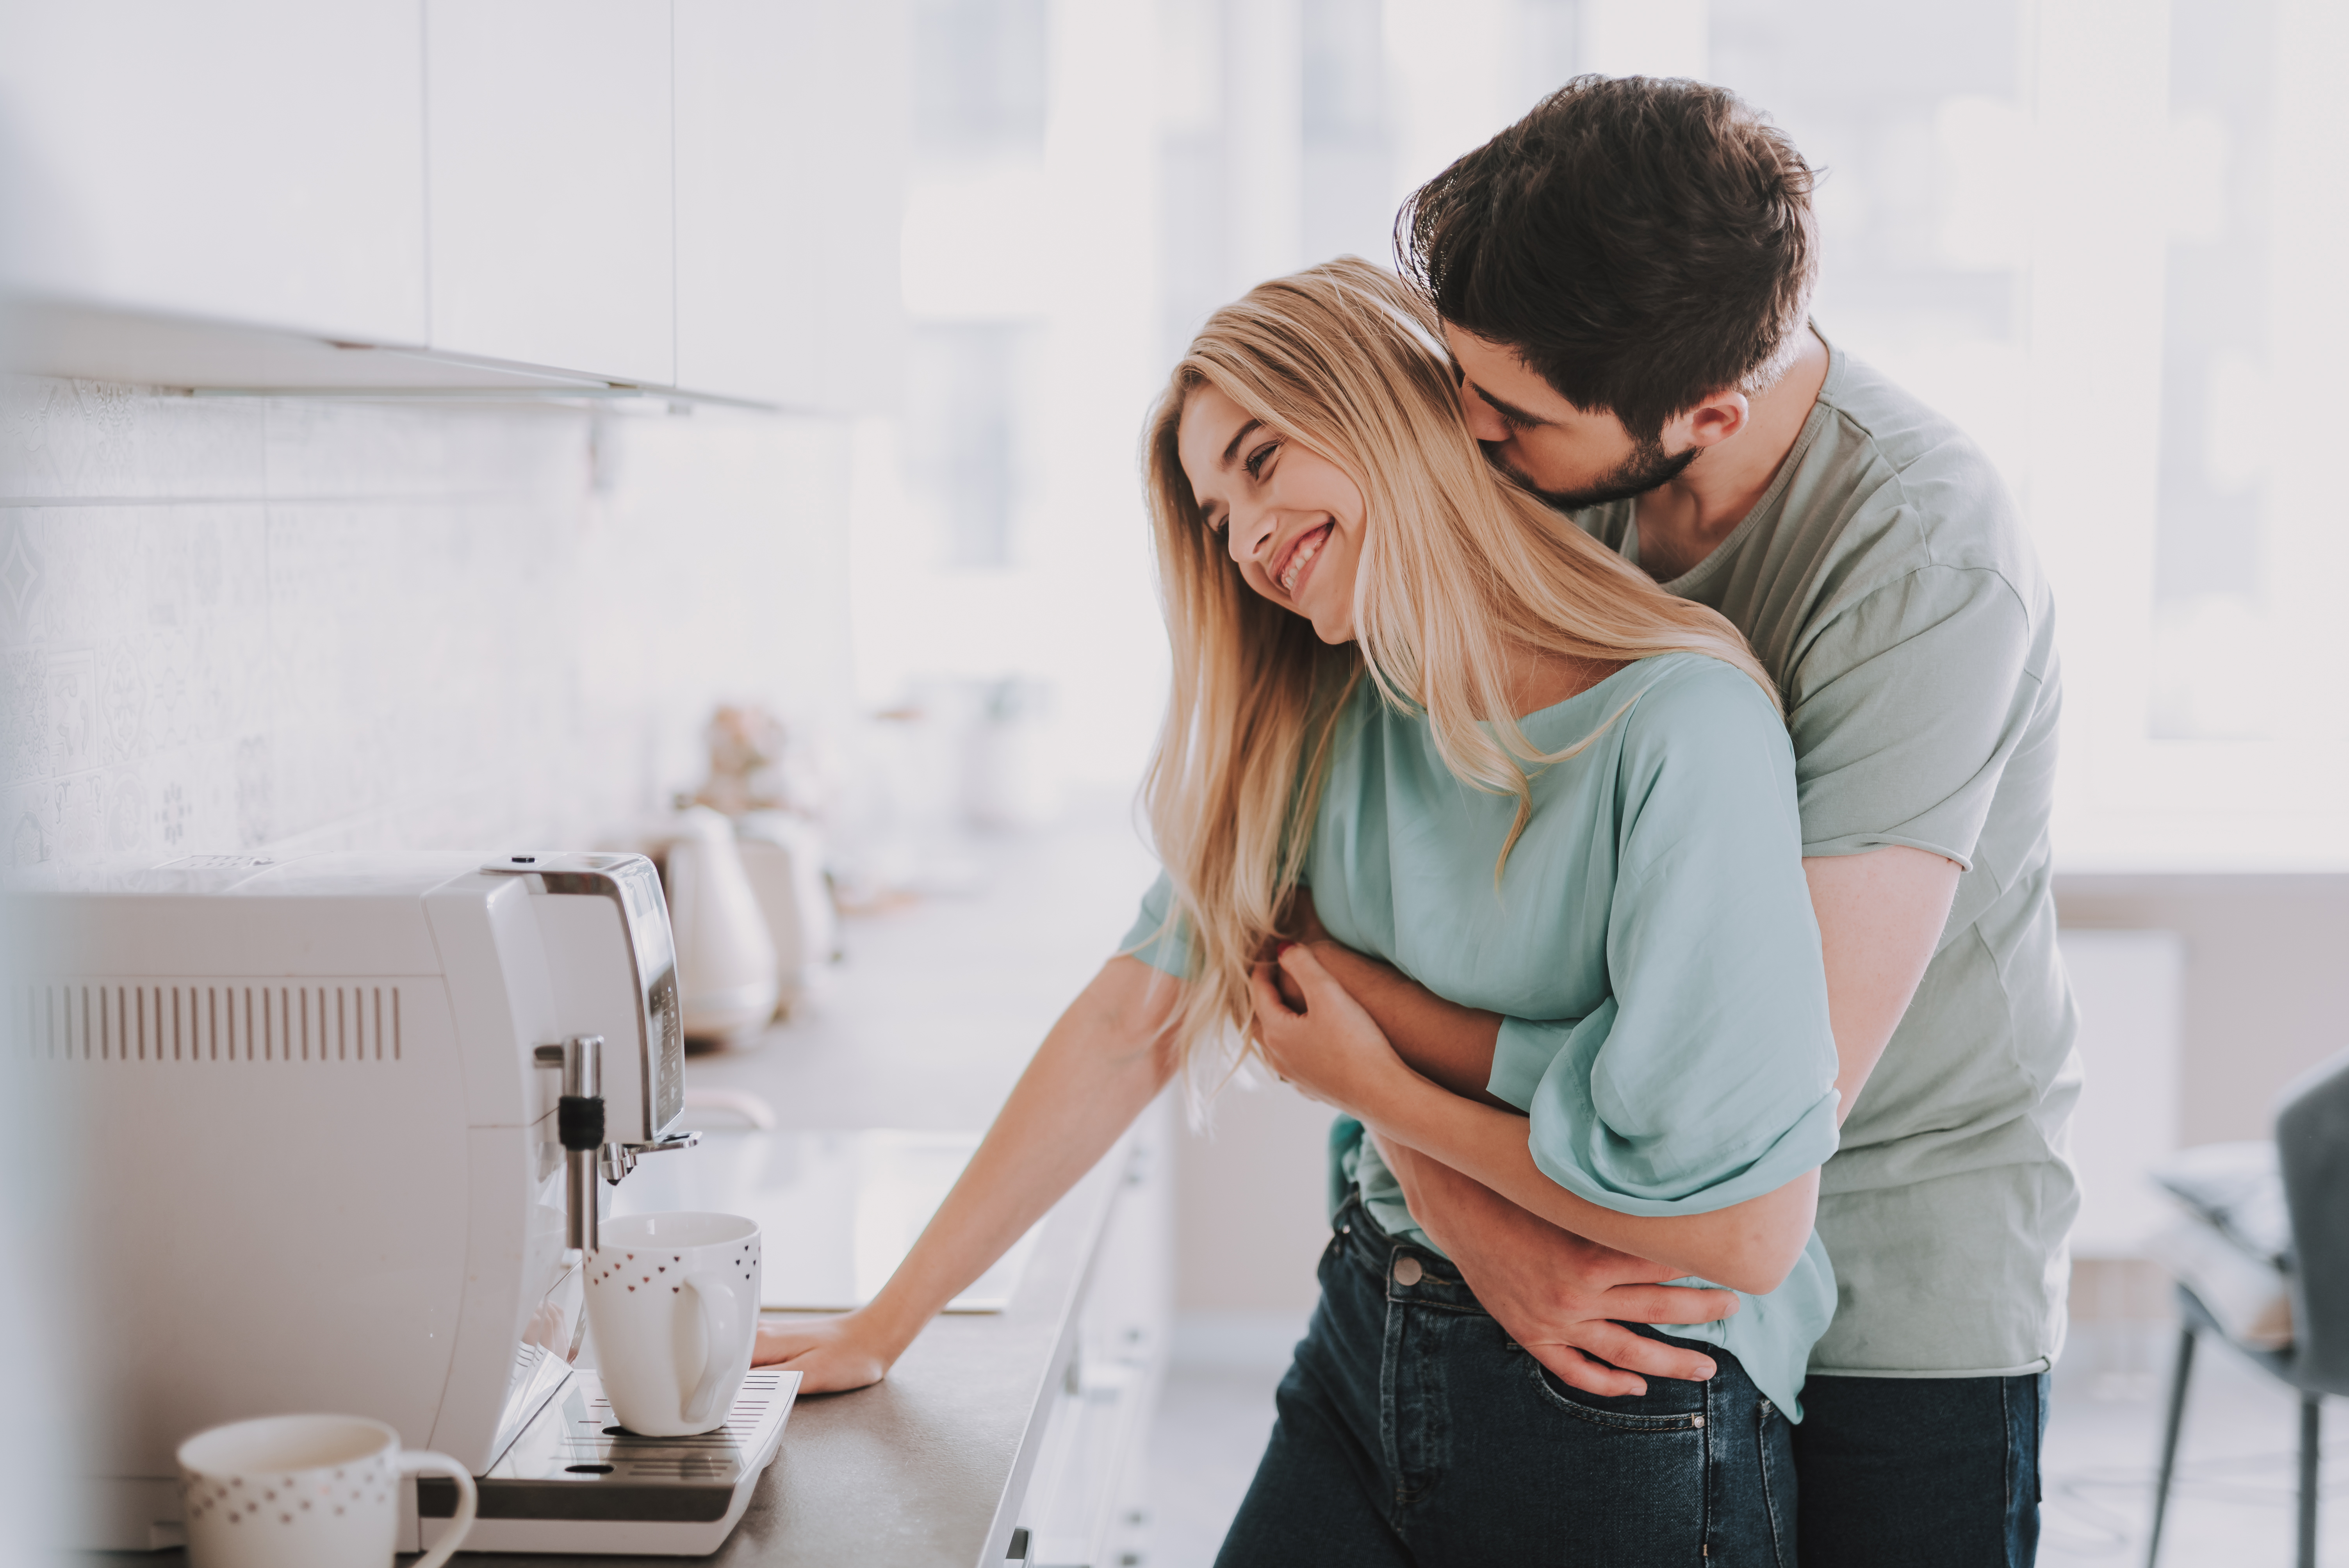 Couple with healthy attachment style embracing